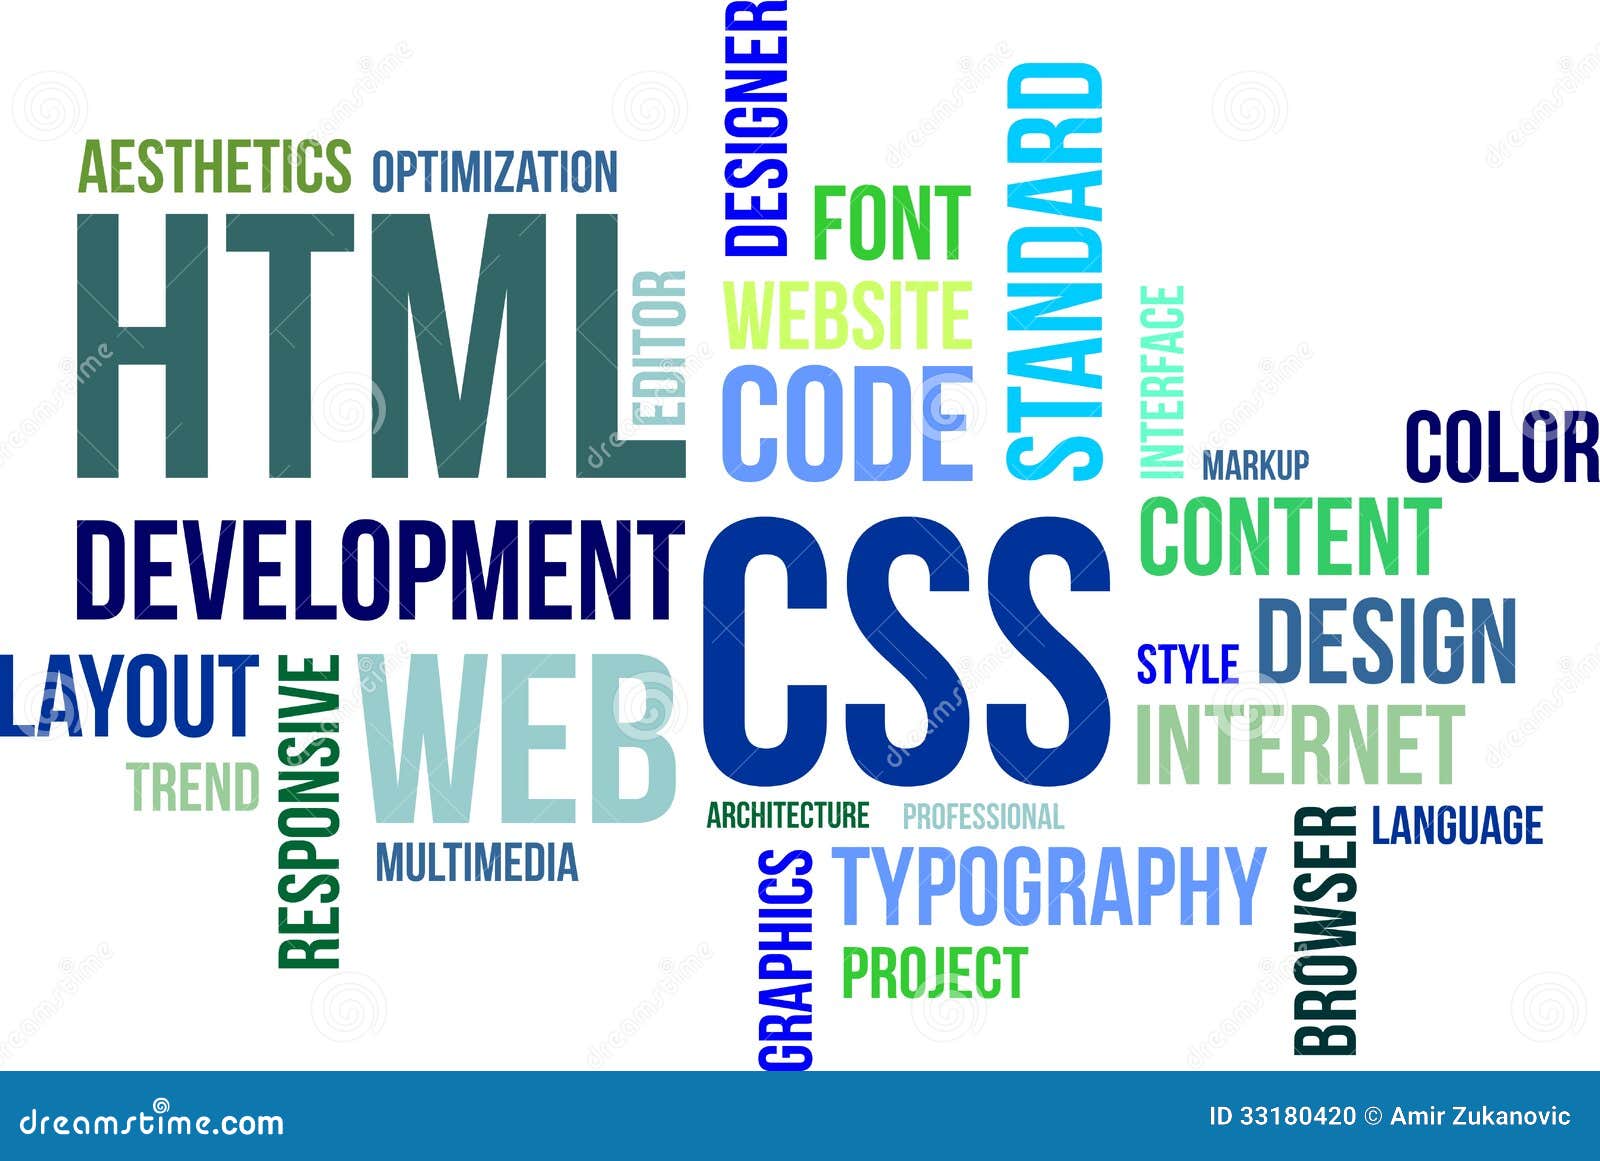 Css Content Download